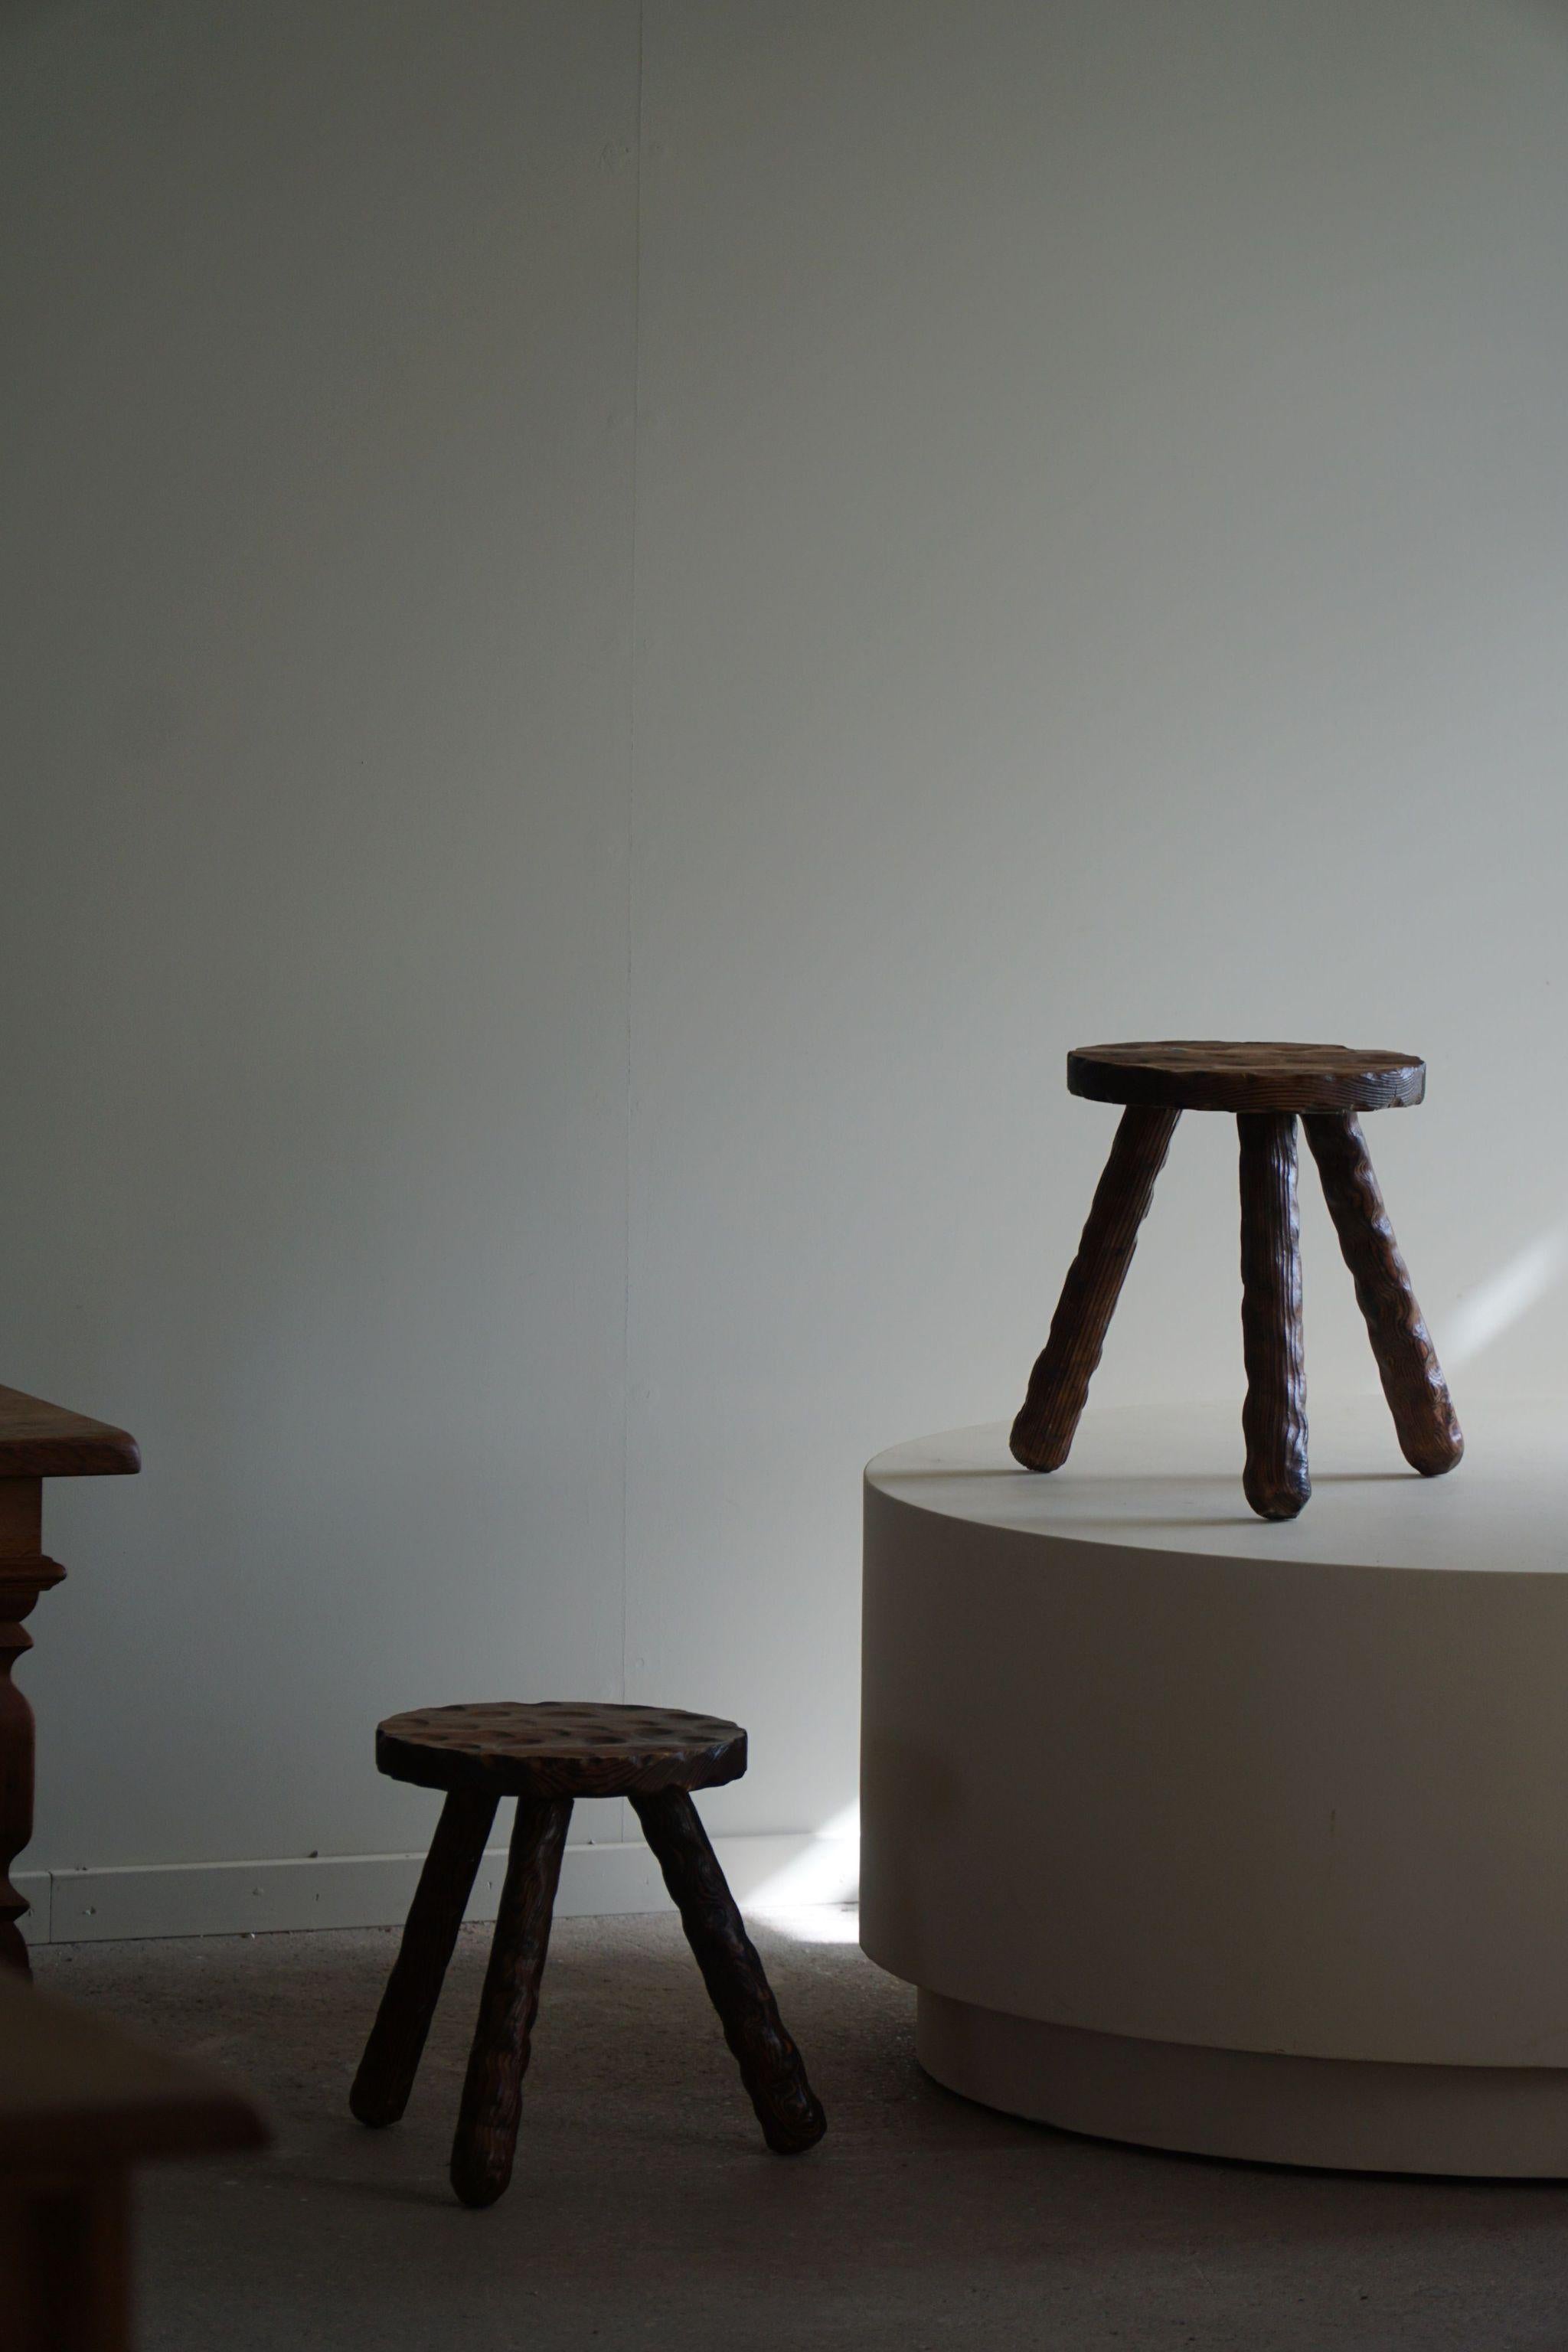 A Pair of Carved Wabi Sabi Stools in Pine, Swedish Mid Century Modern, 1960s For Sale 7